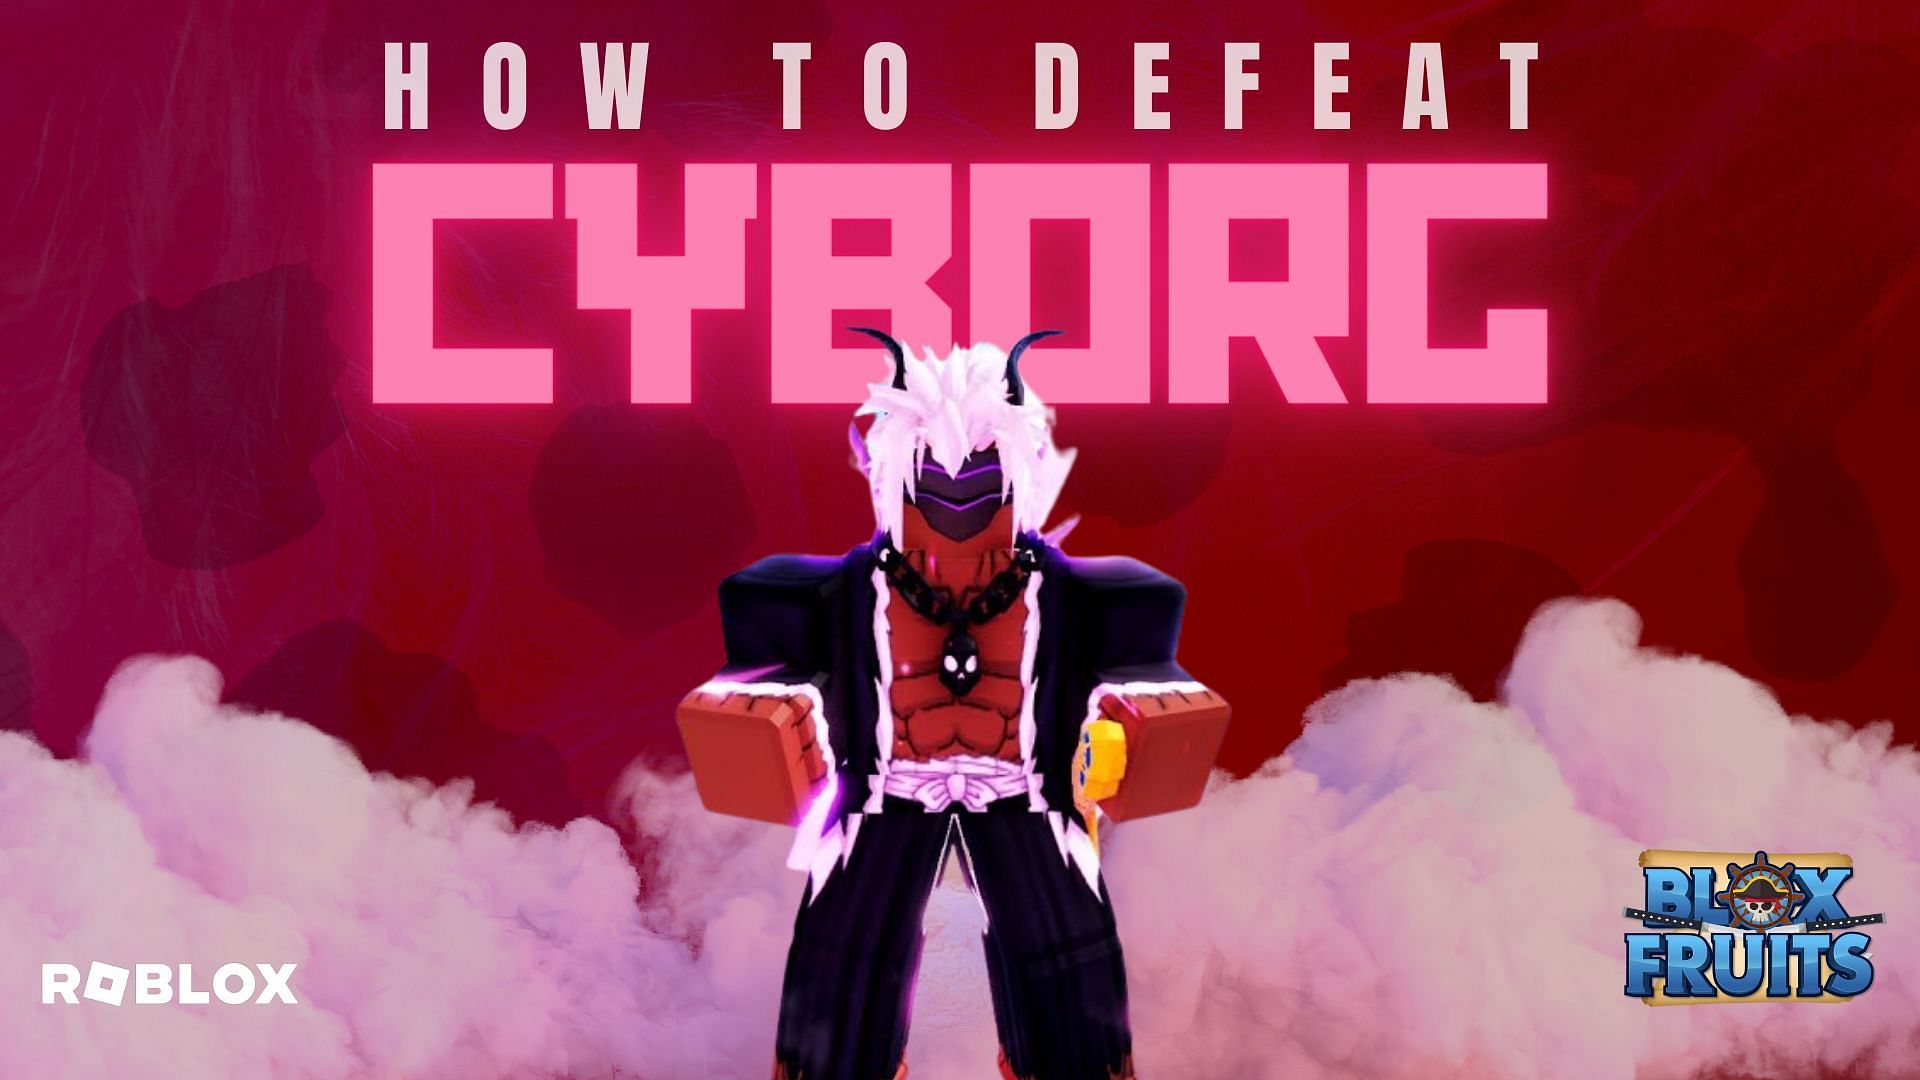 How to defeat Cyborg in Roblox Blox Fruits?